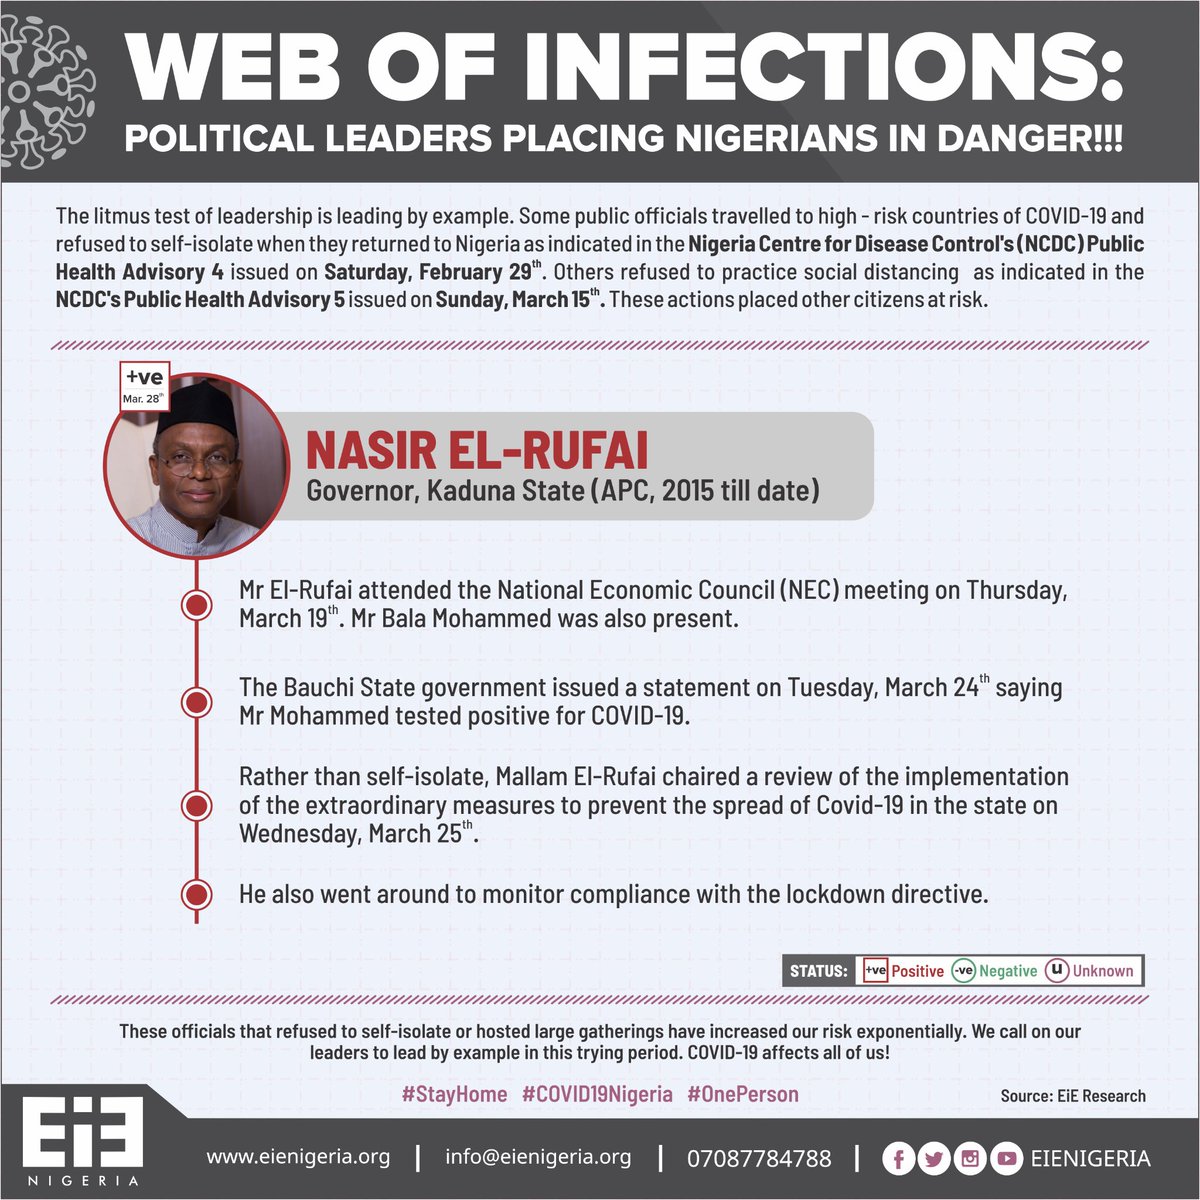  #WebOfInfections - Governor  @elrufai - Attended the NEC meeting where Mr. Bala Mohammed was also present on March 19th.- He also went around to monitor compliance with the lockdown directive in  #Kaduna.- Tested positive for COVID-19 on March 28th. #OnePerson #COVID19Nigeria